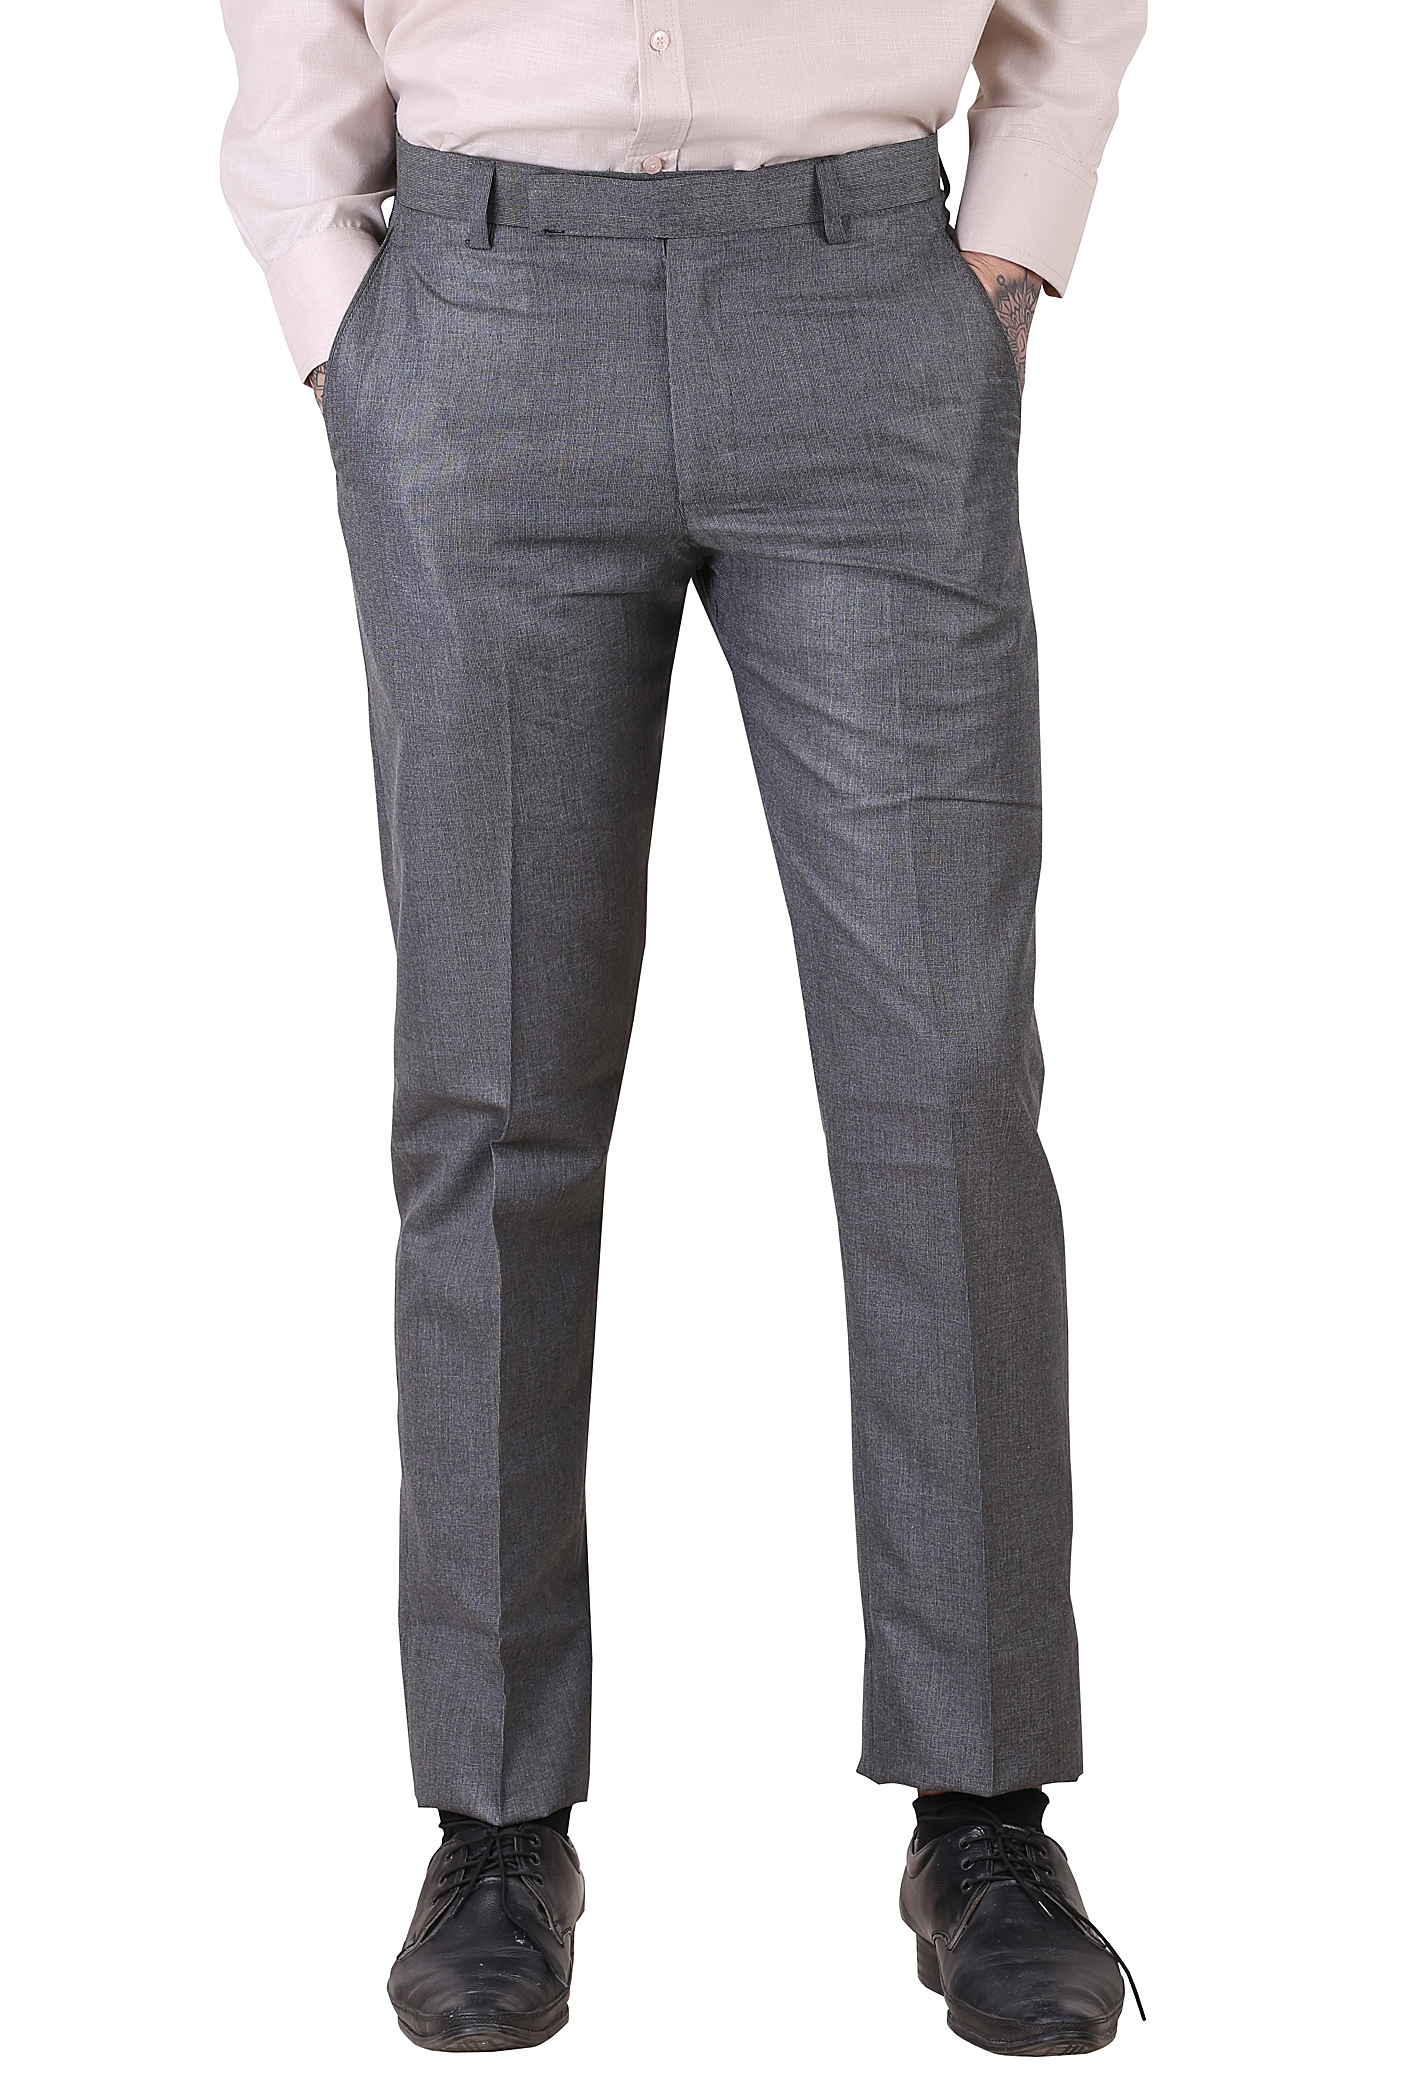 Buy Basic Poly Cotton Casual Trouser For Men Online @ ₹1000 from ShopClues